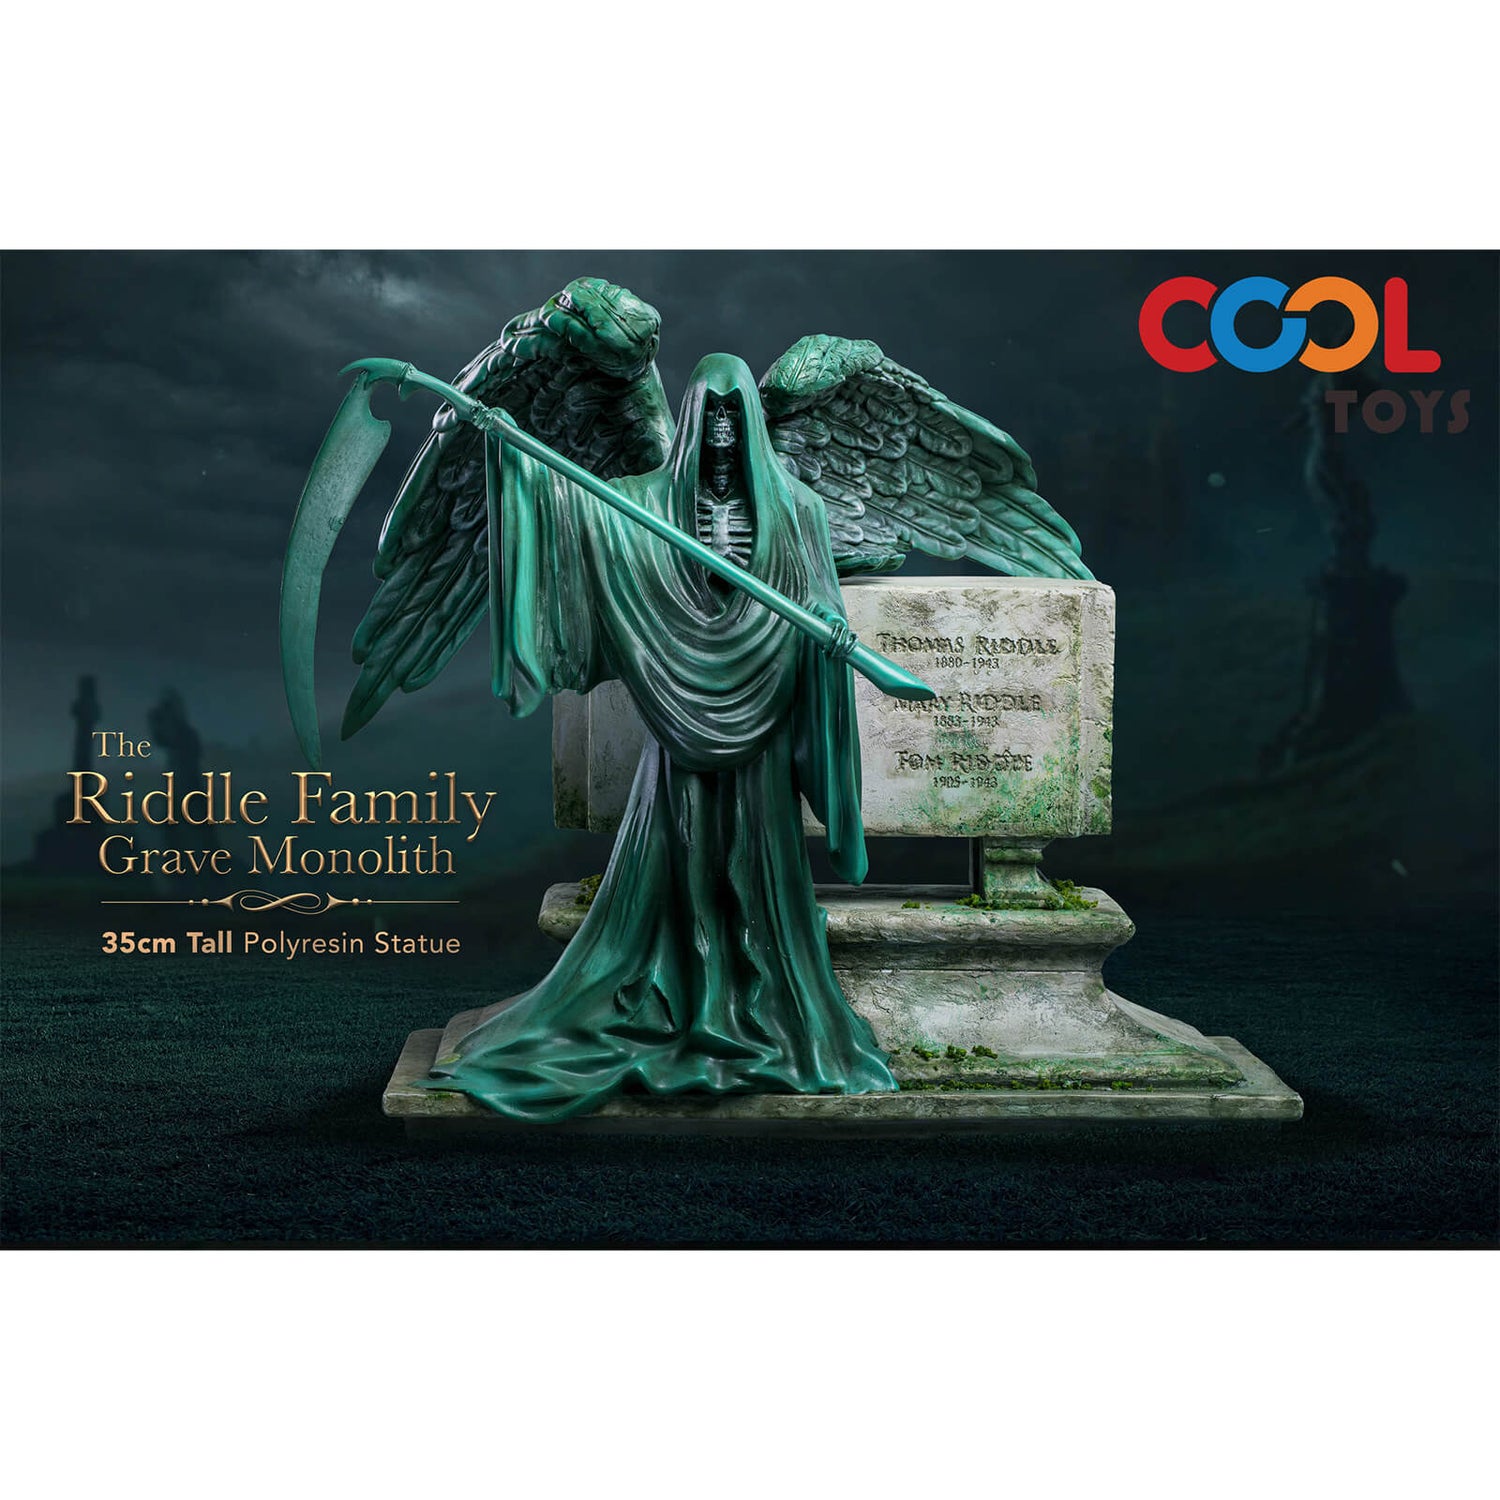 The Riddle Family Grave Monolith Polyresin Statue